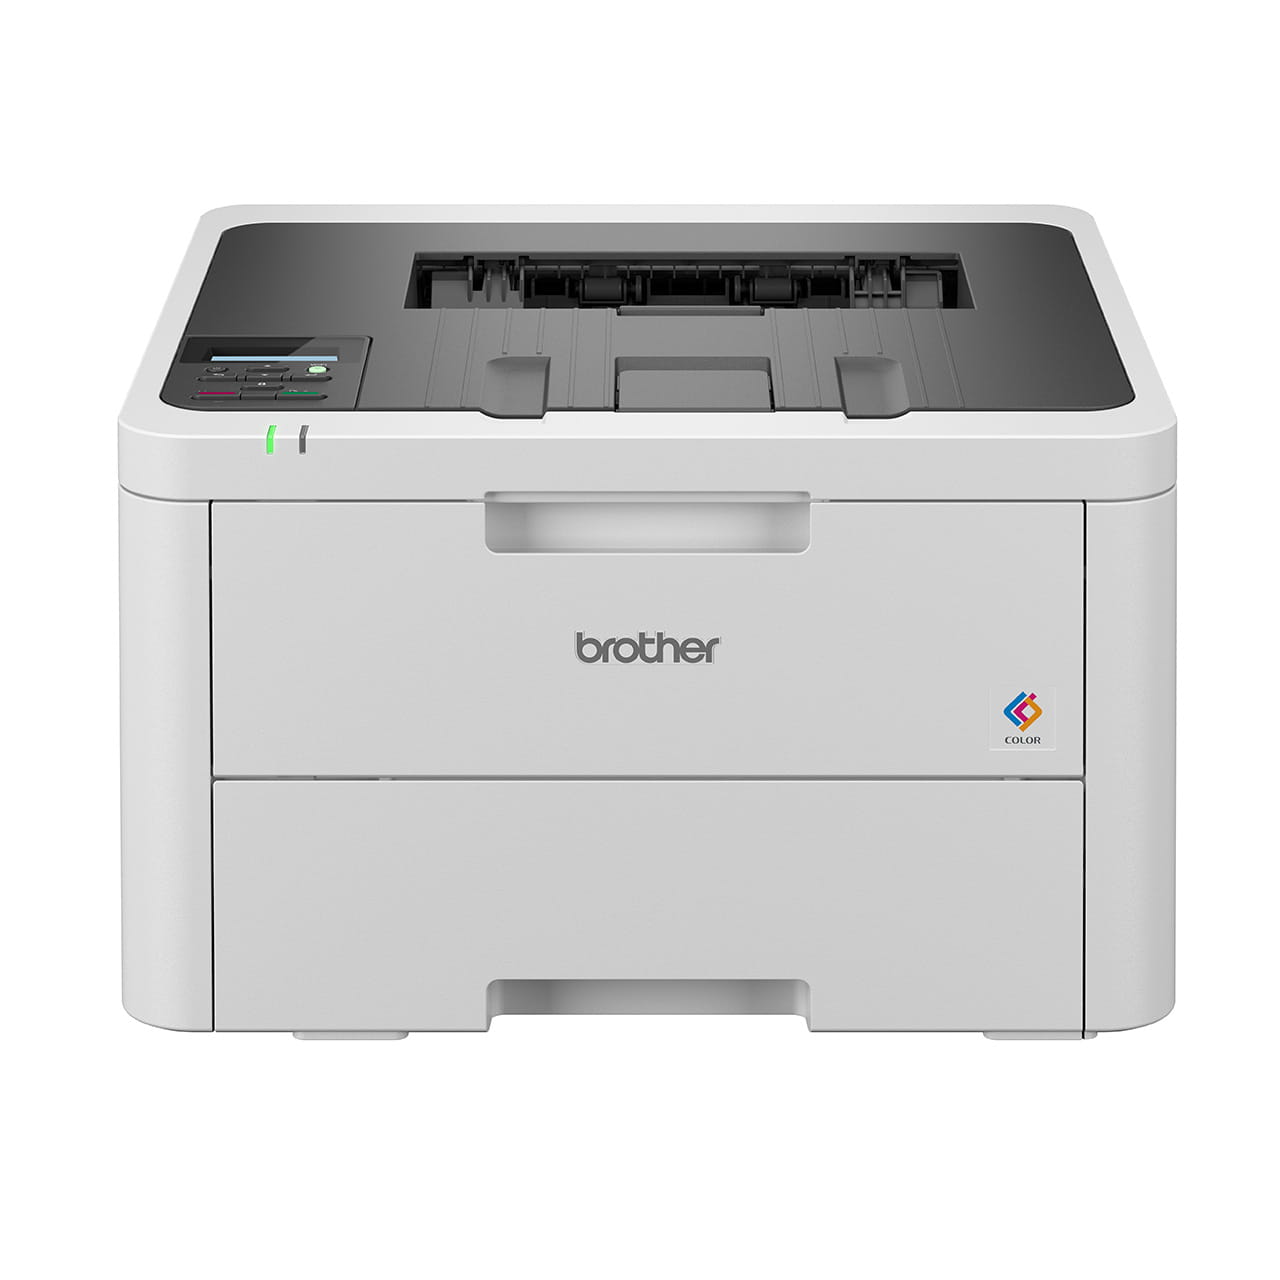 Brother HL-L3240CDW Colour Laser Printer Front View